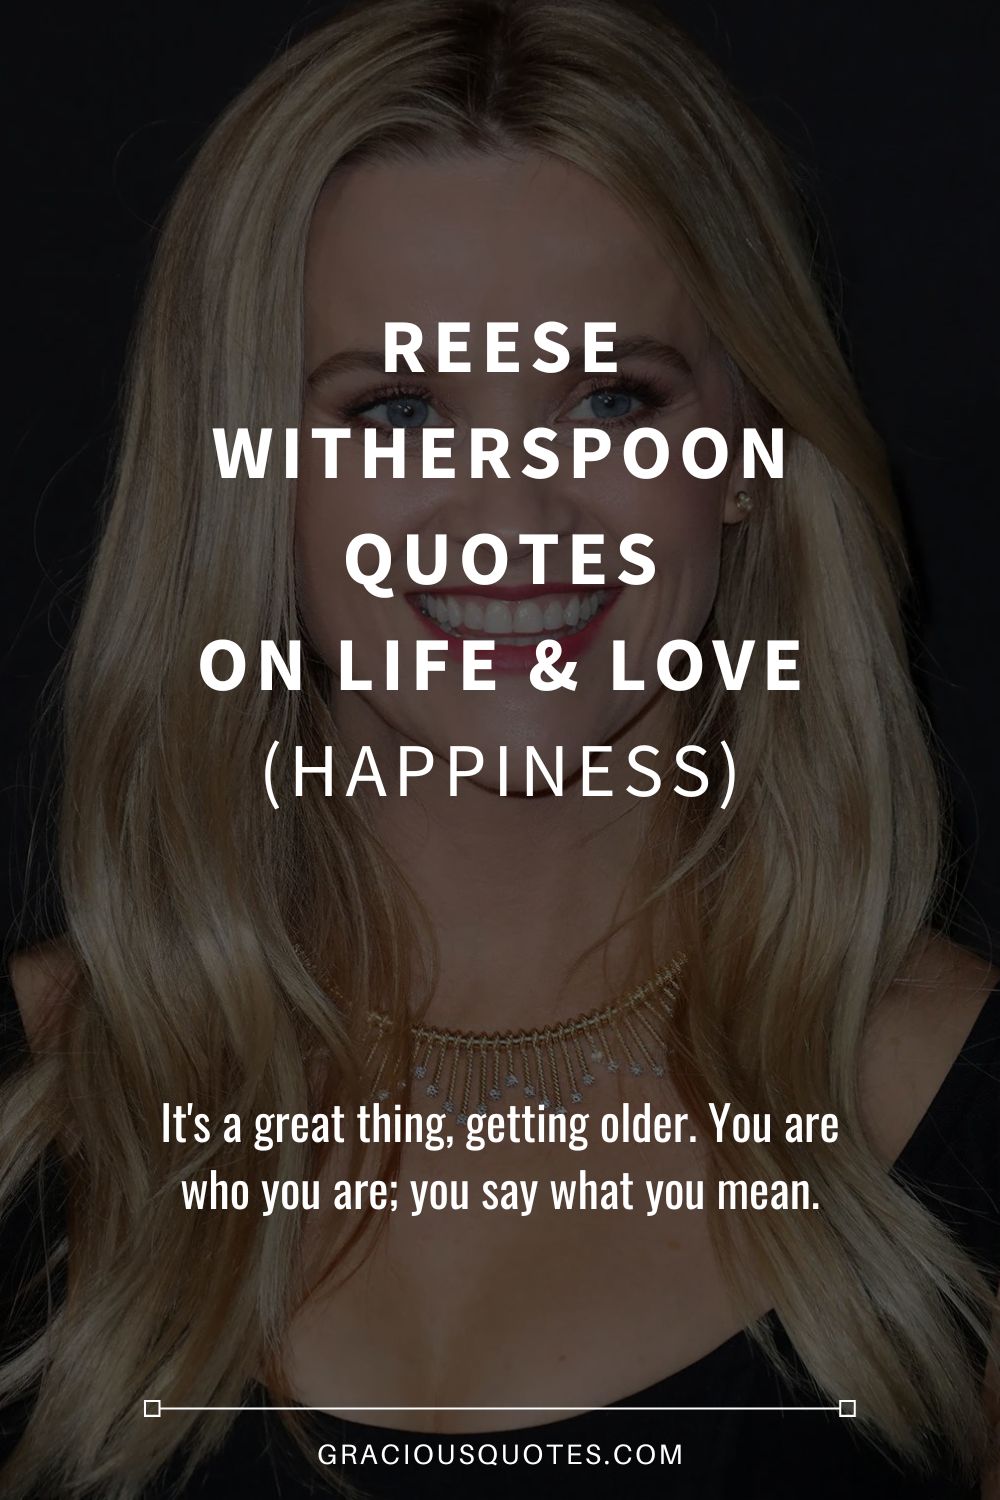 Reese Witherspoon Quotes on Life & Love (HAPPINESS) - Gracious Quotes